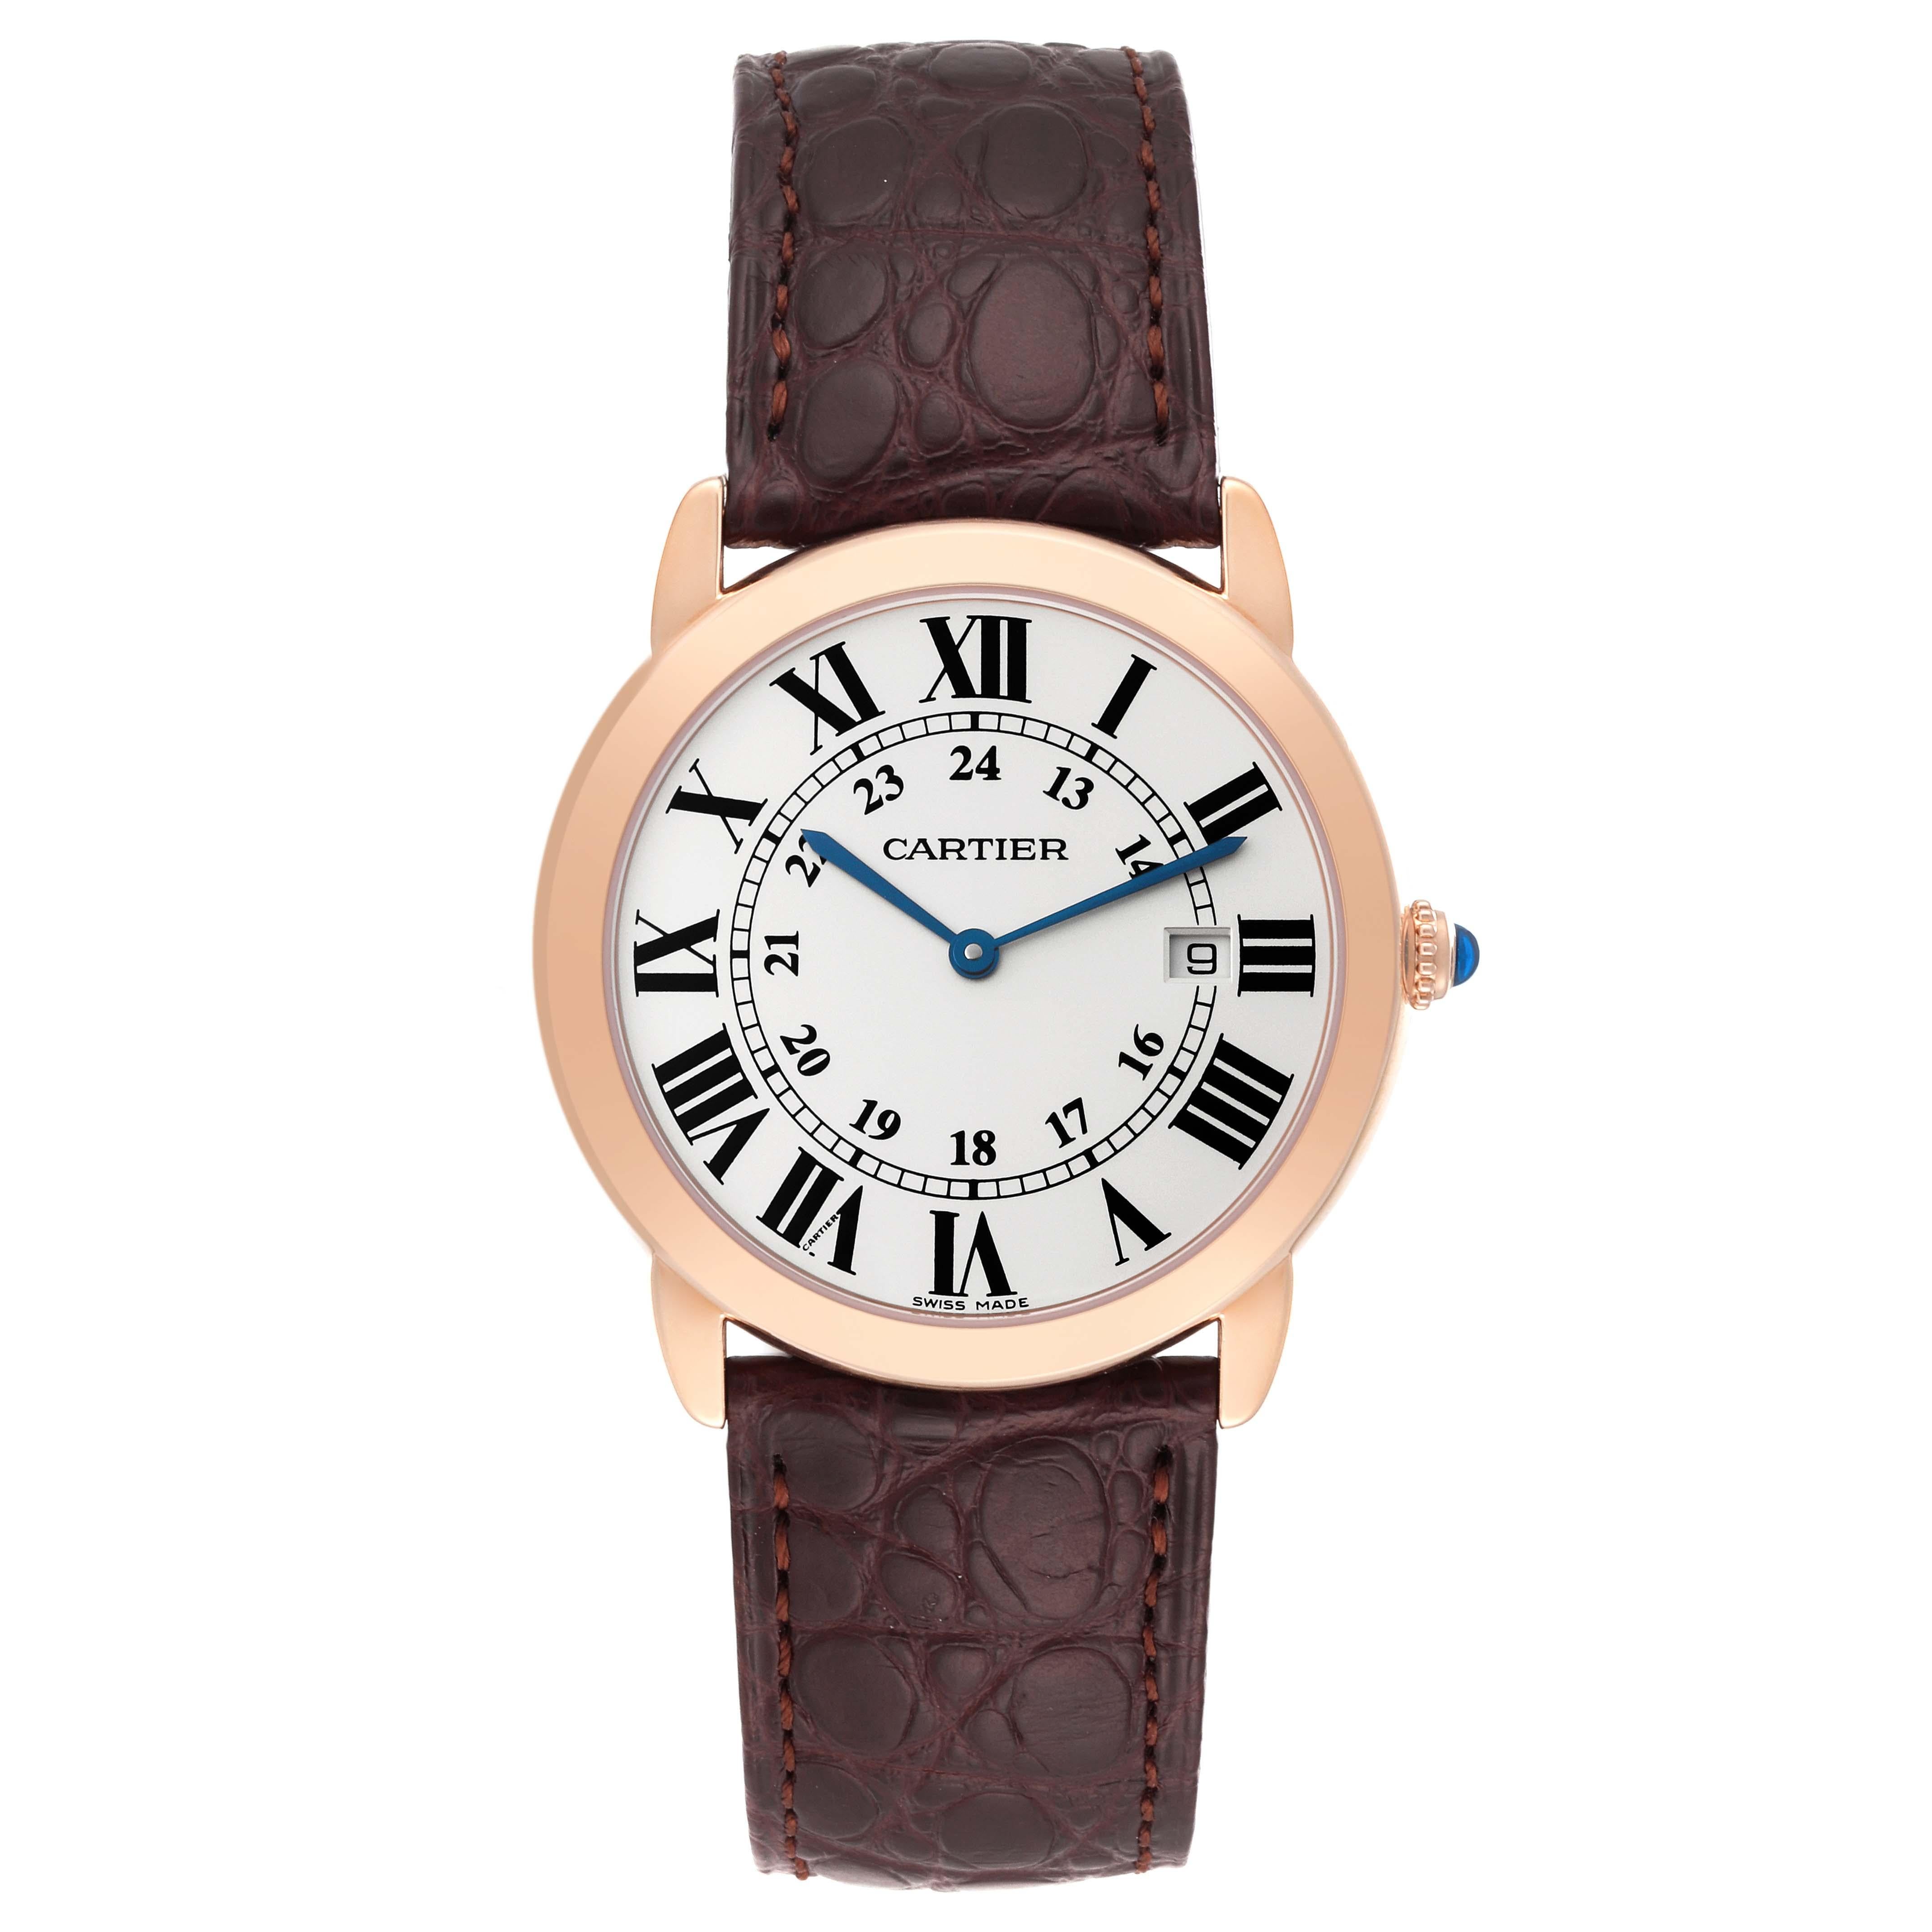 Cartier Ronde Solo Large Rose Gold Steel Mens Watch W6701008 Card. Quartz movement. 18K rose gold case 36.0 mm in diameter. Stainless steel caseback. Circular grained crown set with a blue spinel cabochon. . Scratch resistant sapphire crystal.